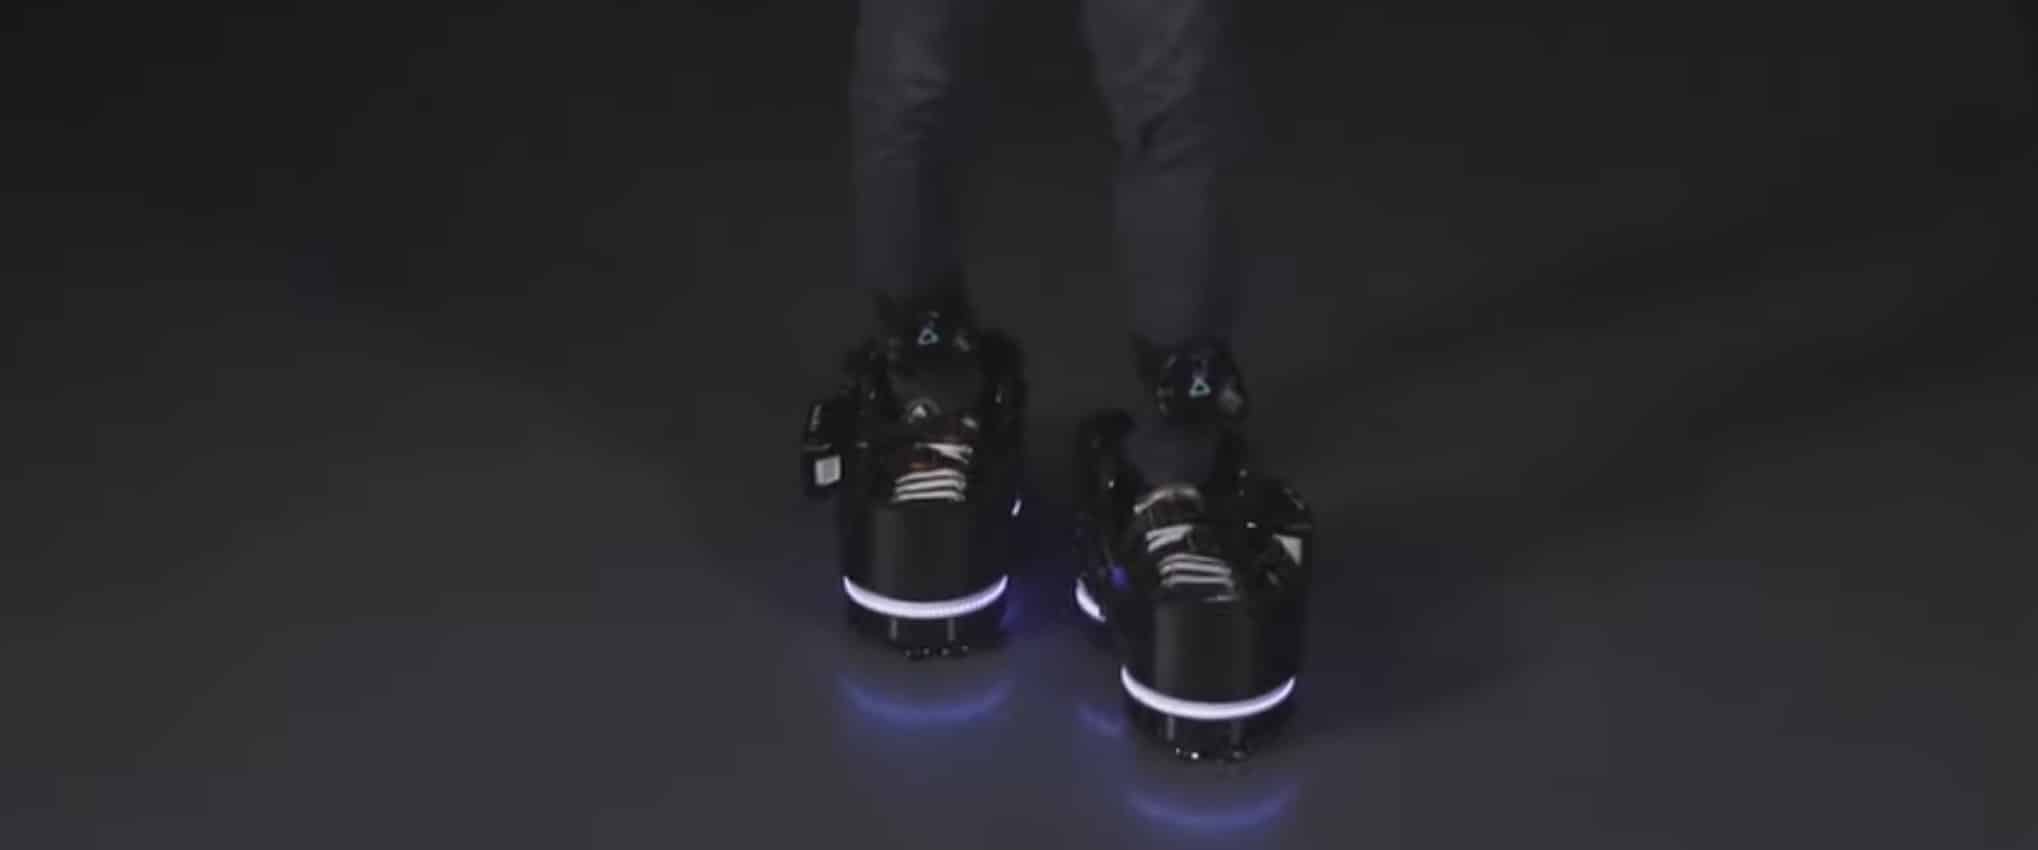 The walking revolution in VR.  Resembling the EKTO ONE roller skates significantly increases the immersion